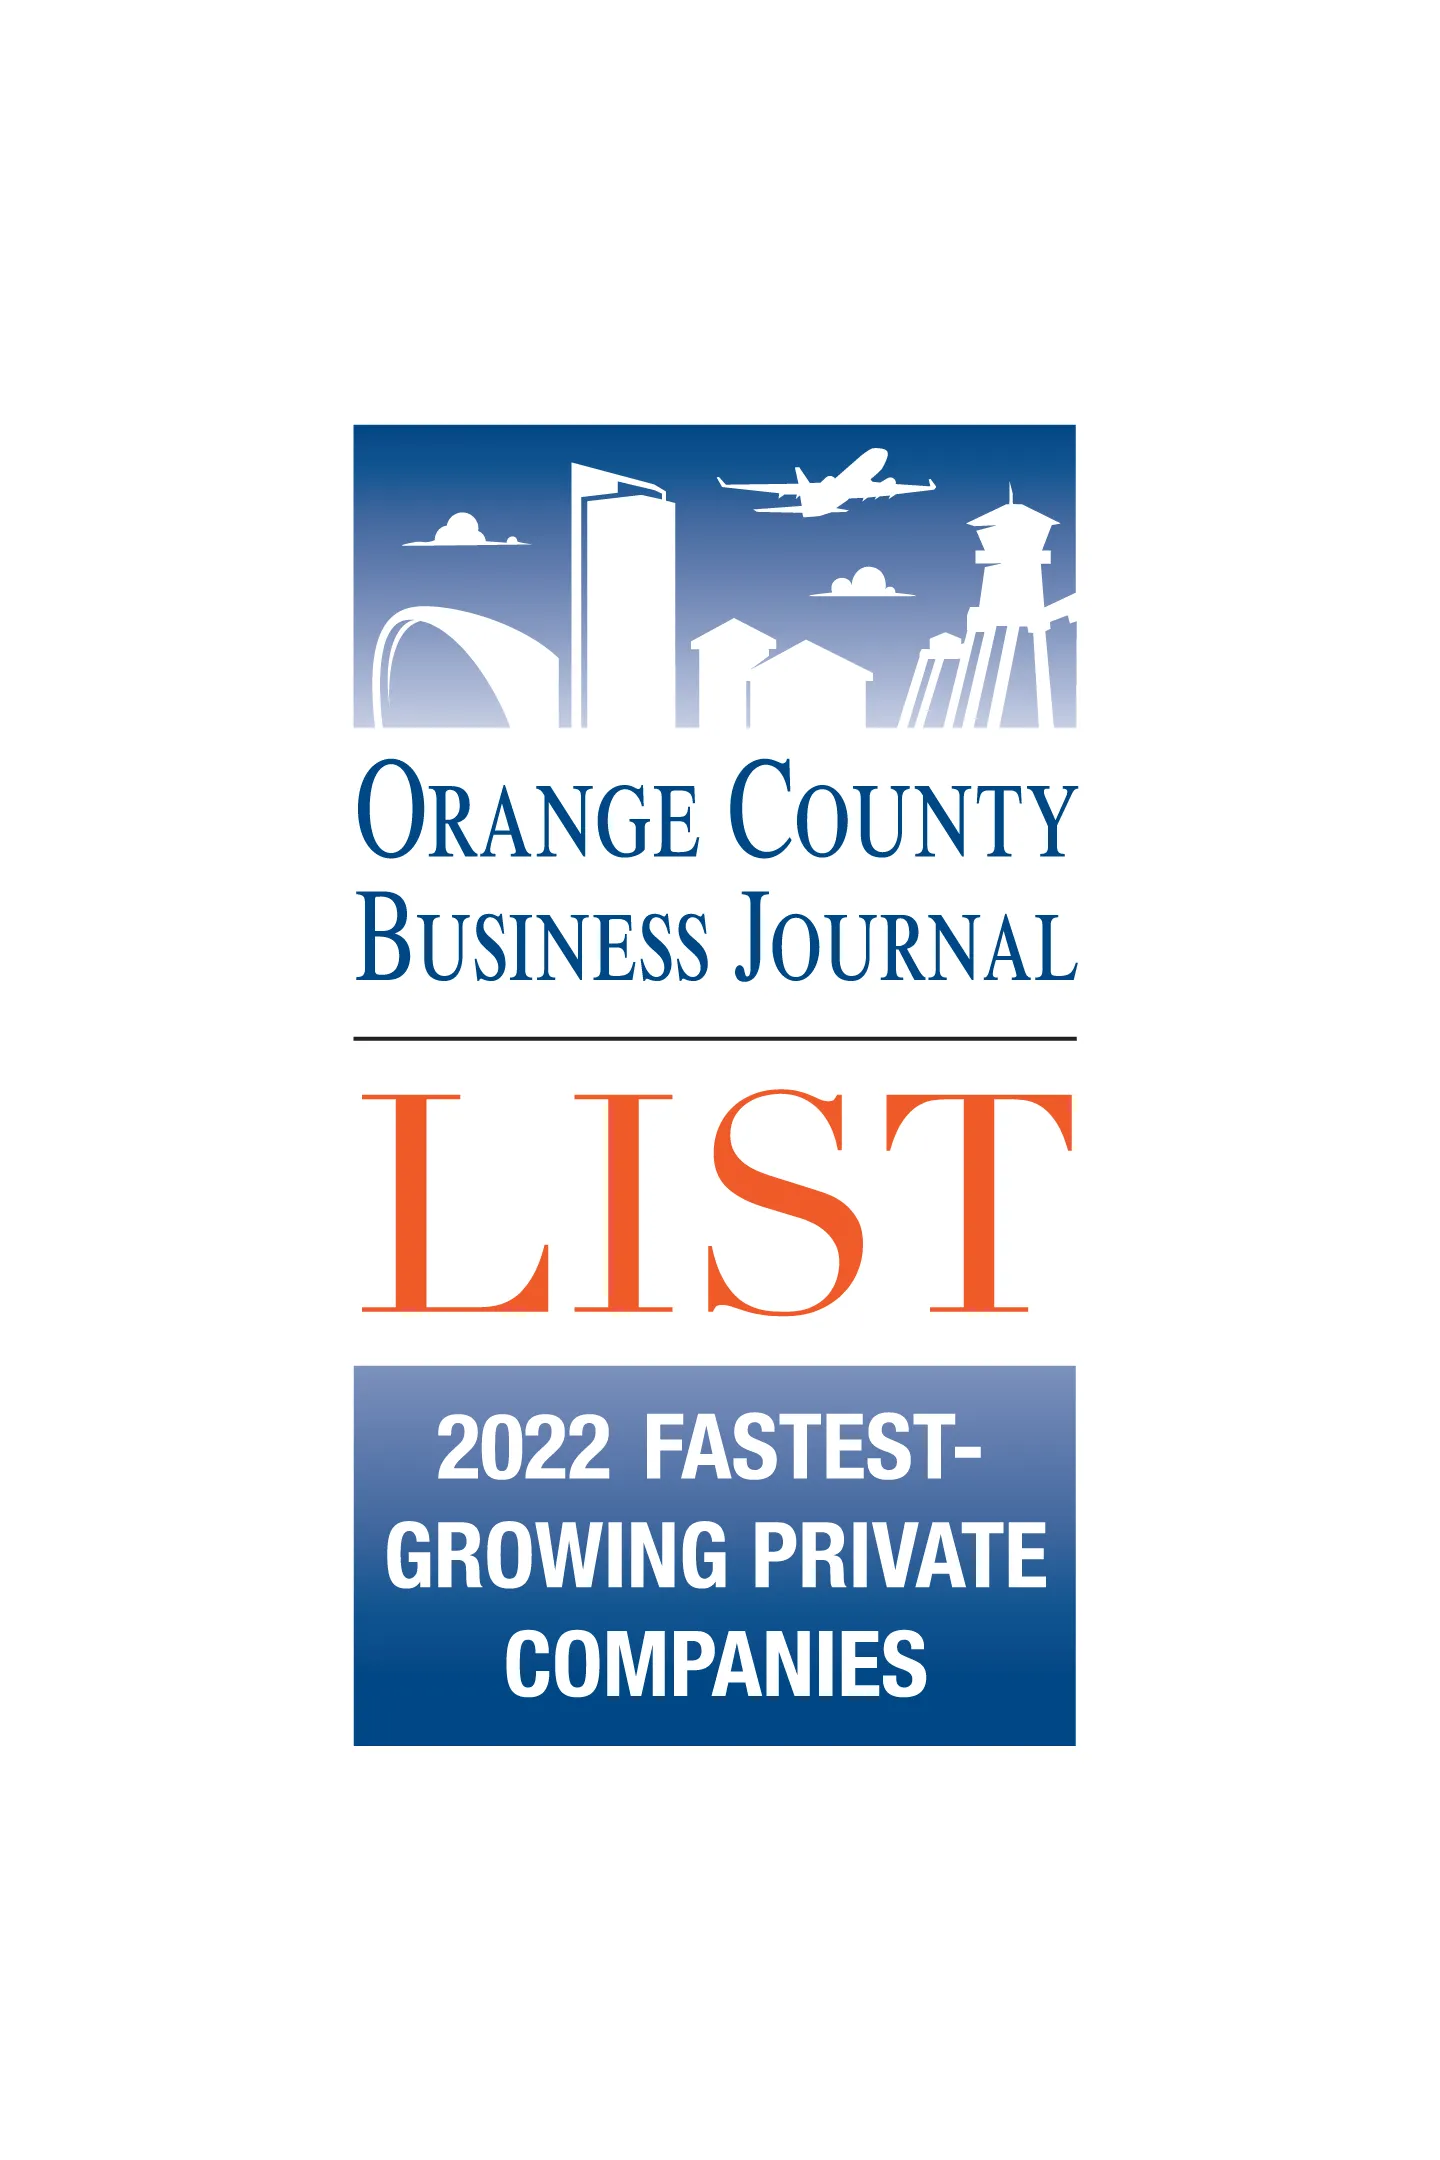 List_Icon_2022-Fastest-Growing-Private-Companies